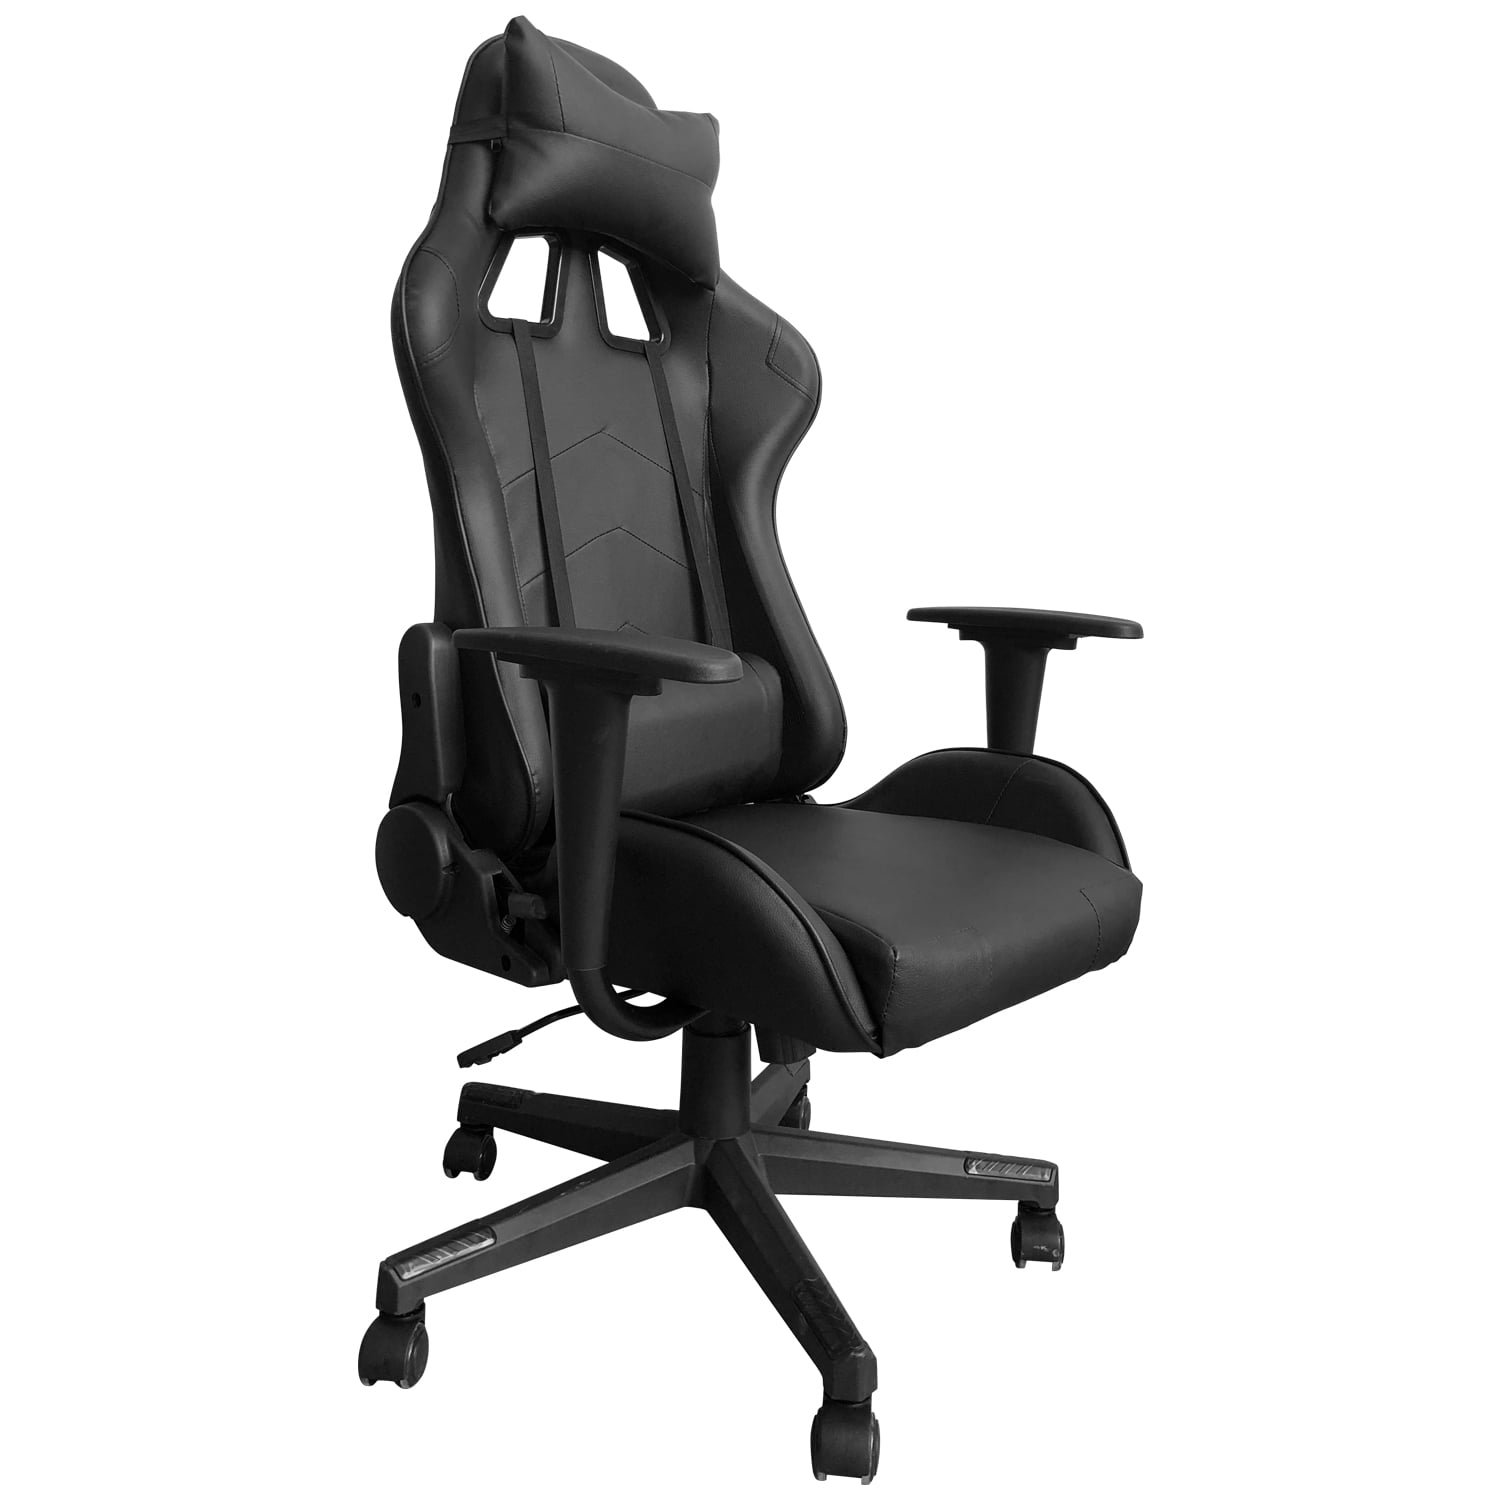 MIRacing Gaming Chair Reclining Memory Foam Racing Computer Chair Ergonomic High-Back Desk Office Chair with Headrest and Lumbar Support Blue